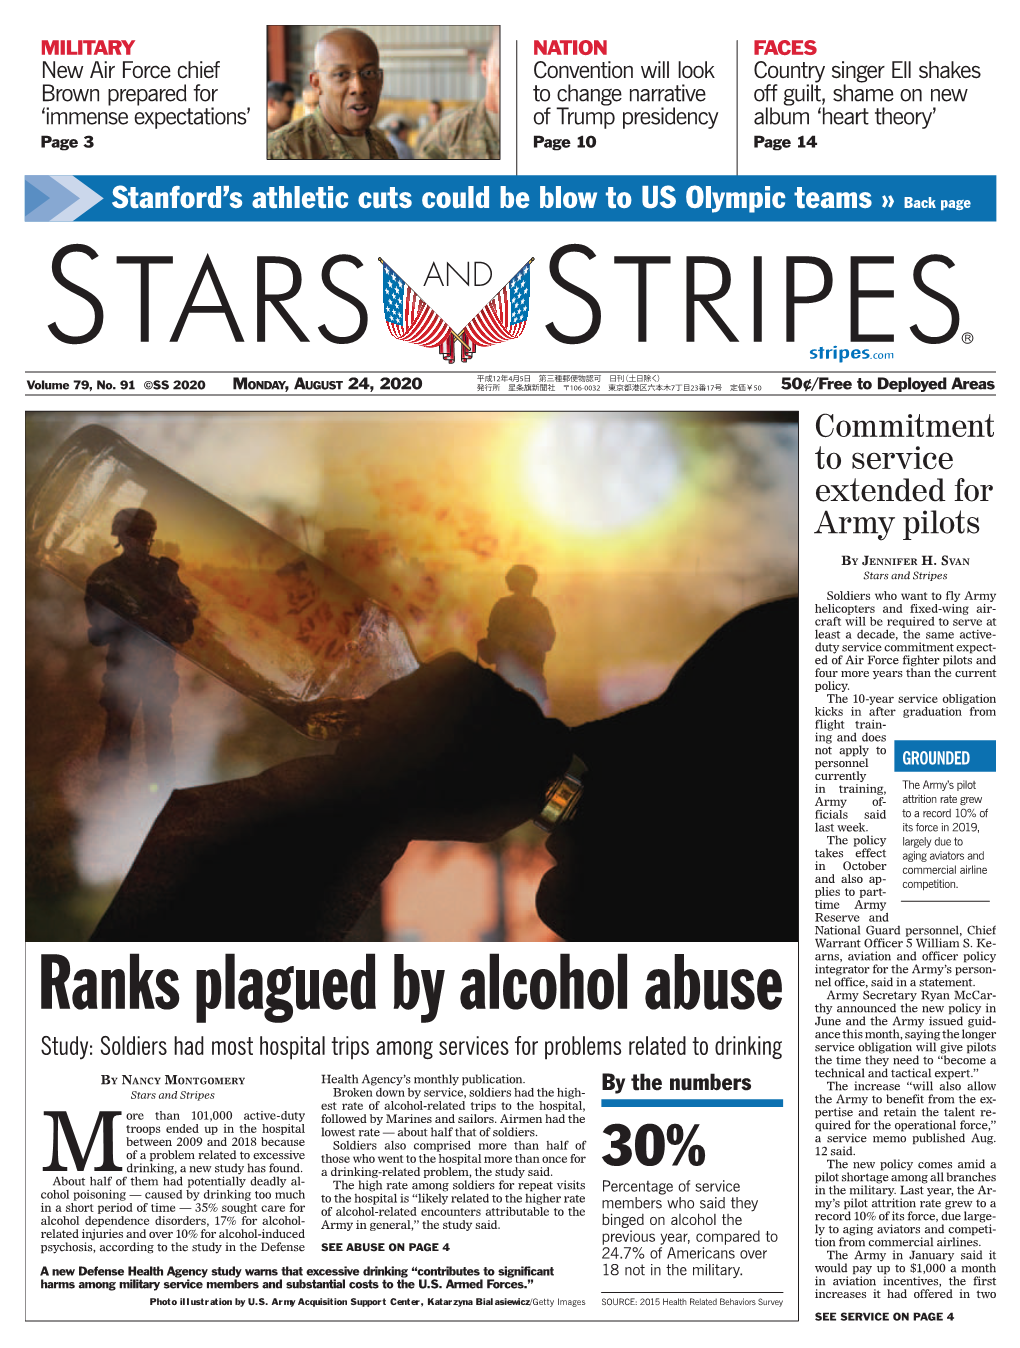 Ranks Plagued by Alcohol Abuse